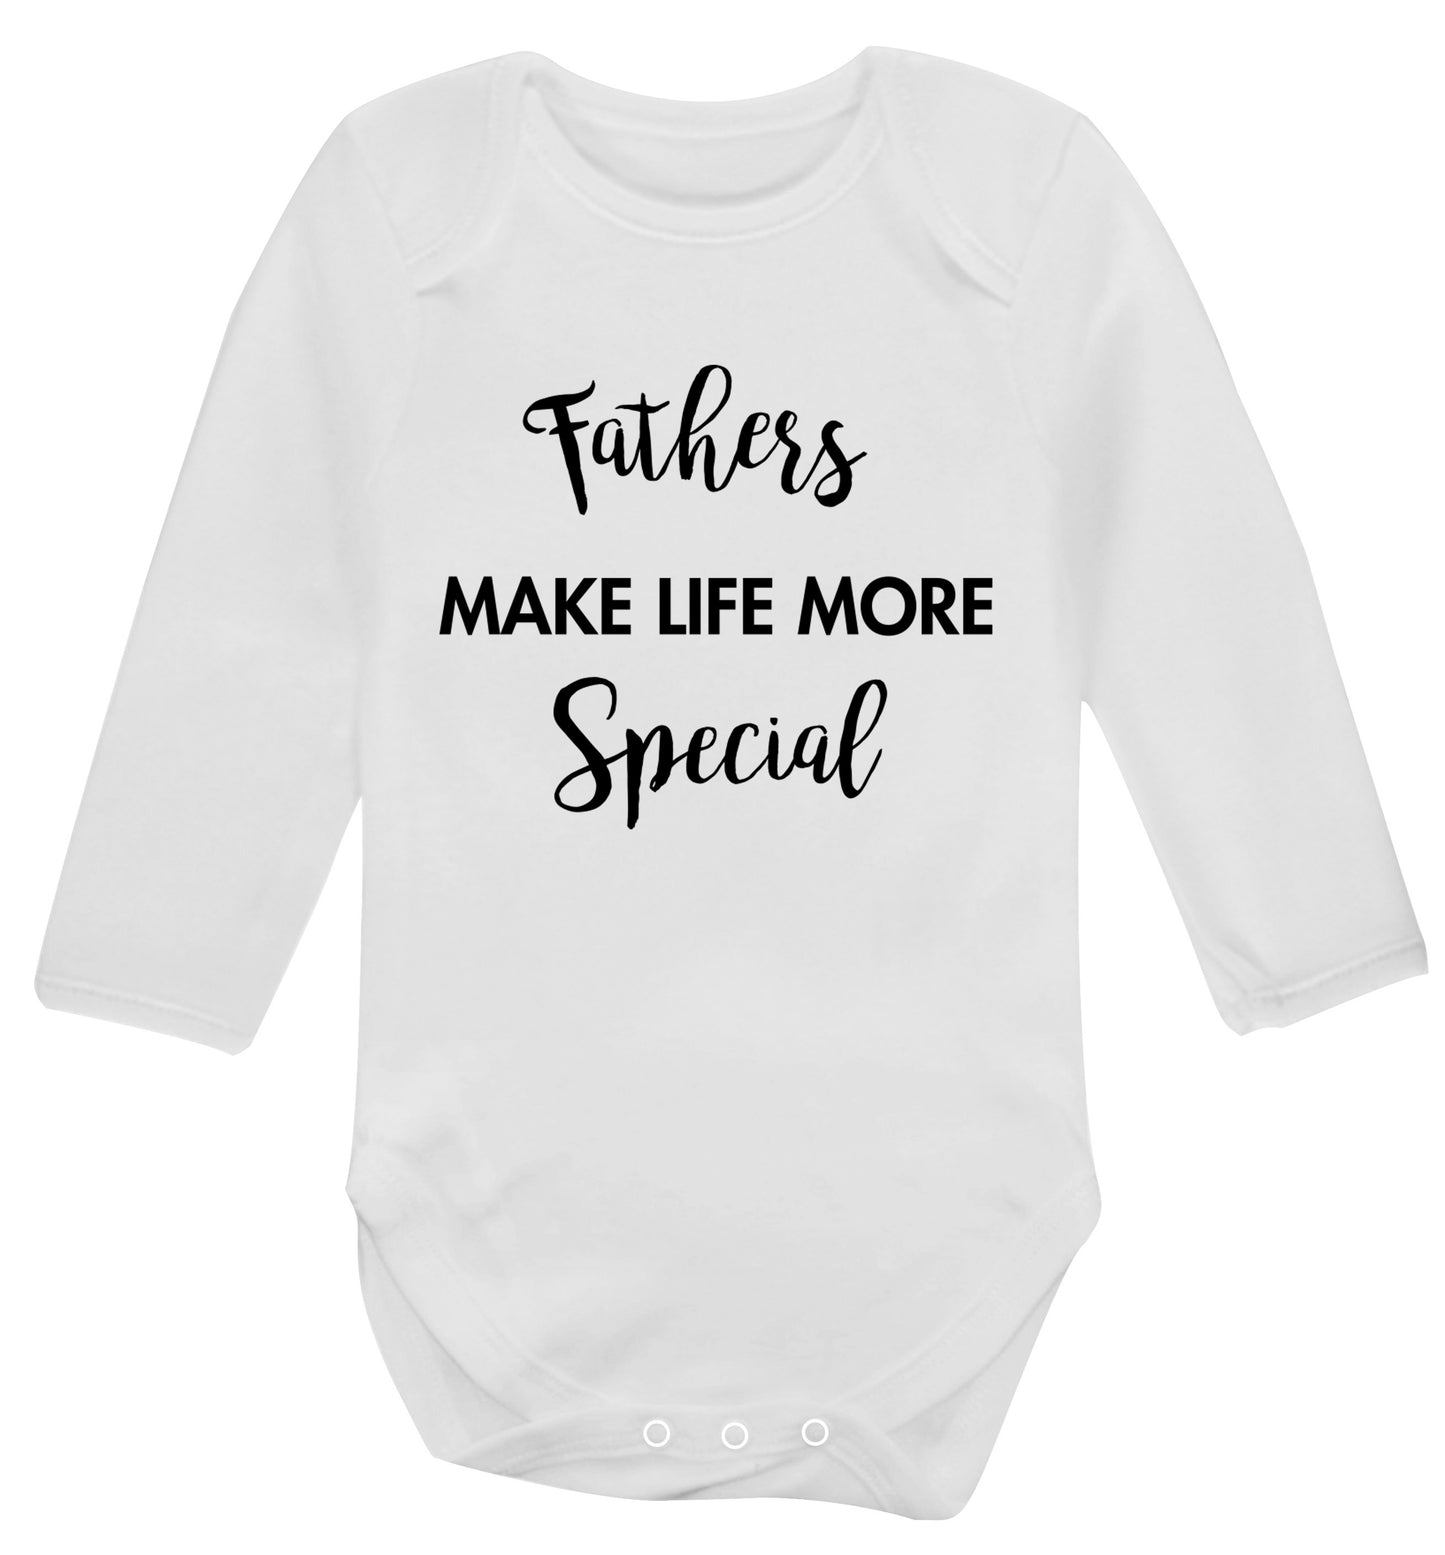 Fathers make life more special Baby Vest long sleeved white 6-12 months